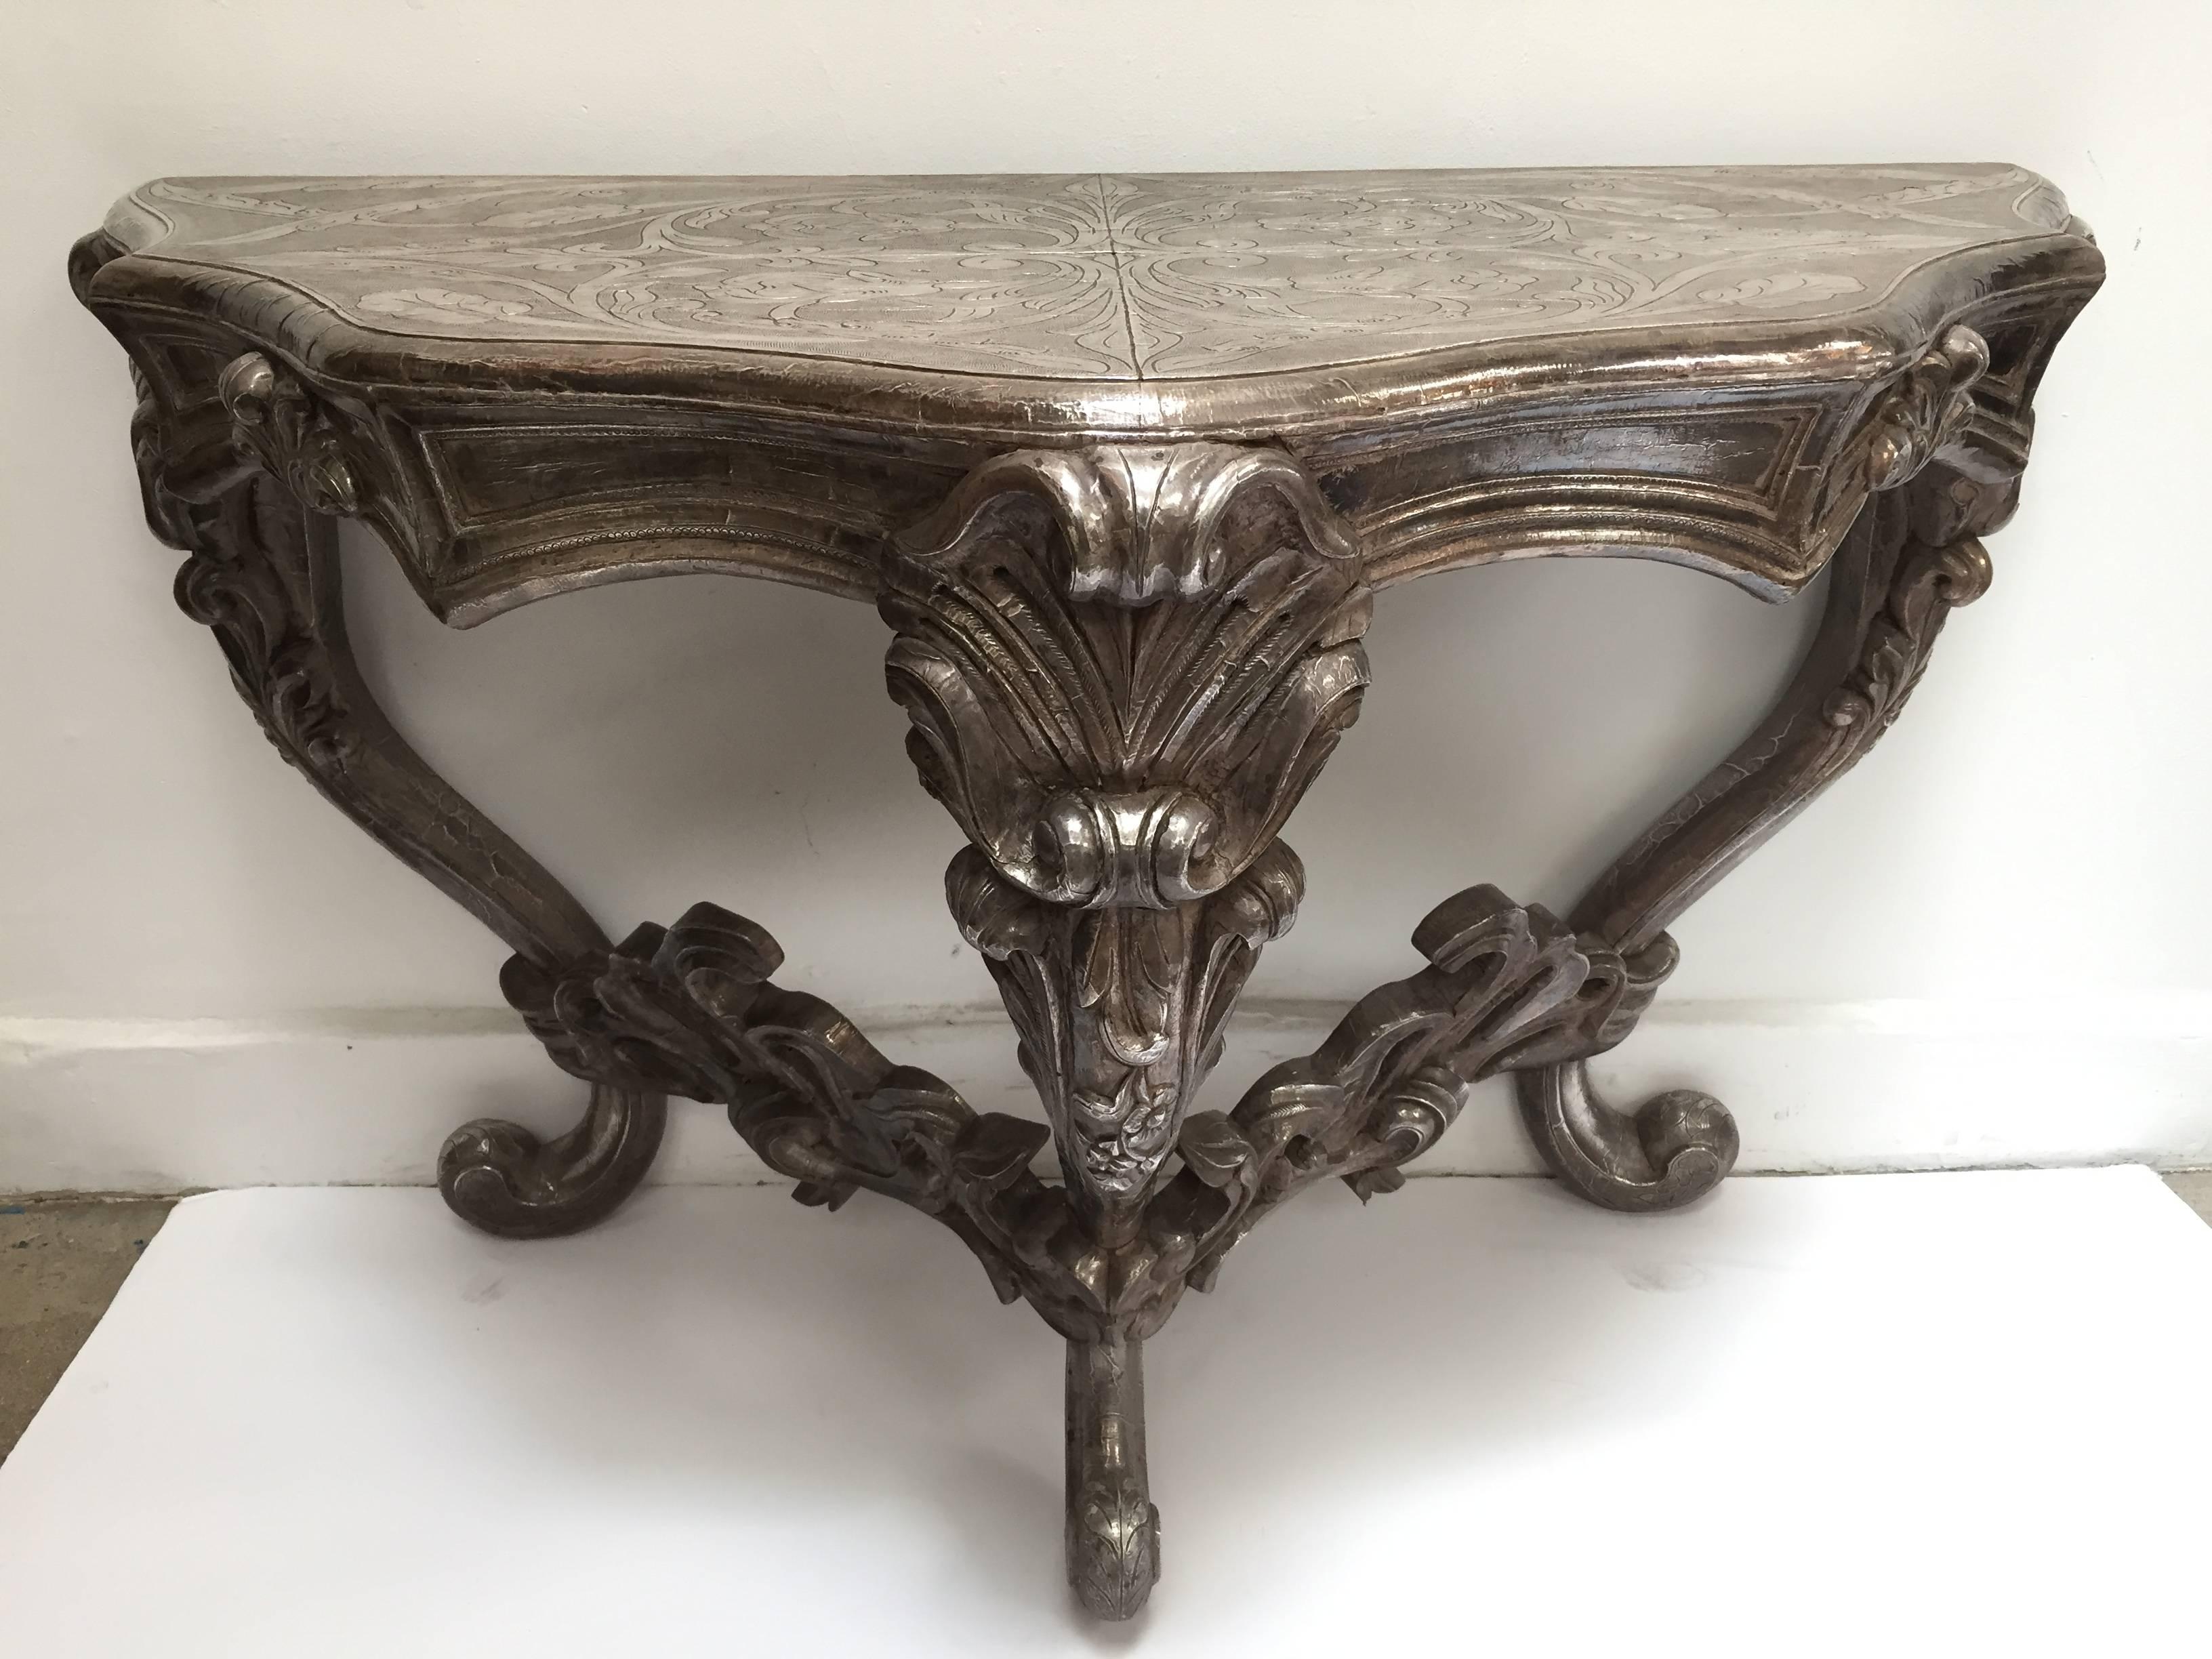 Silver Leaf Anglo-Indian Silvered Wrapped Clad Console Table in Louis XV Style